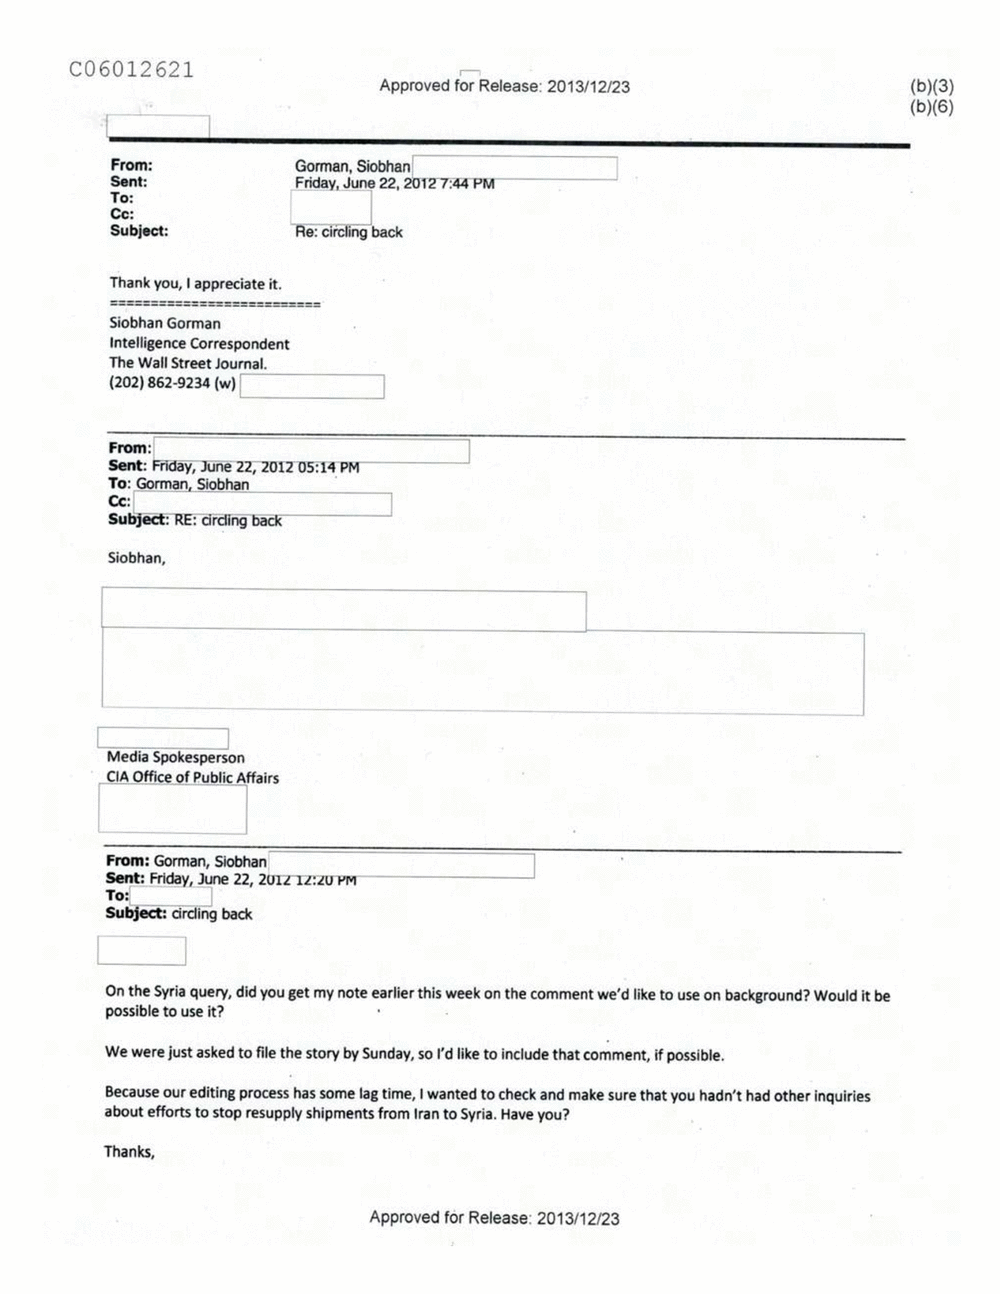 Page 171 from Email Correspondence Between Reporters and CIA Flacks